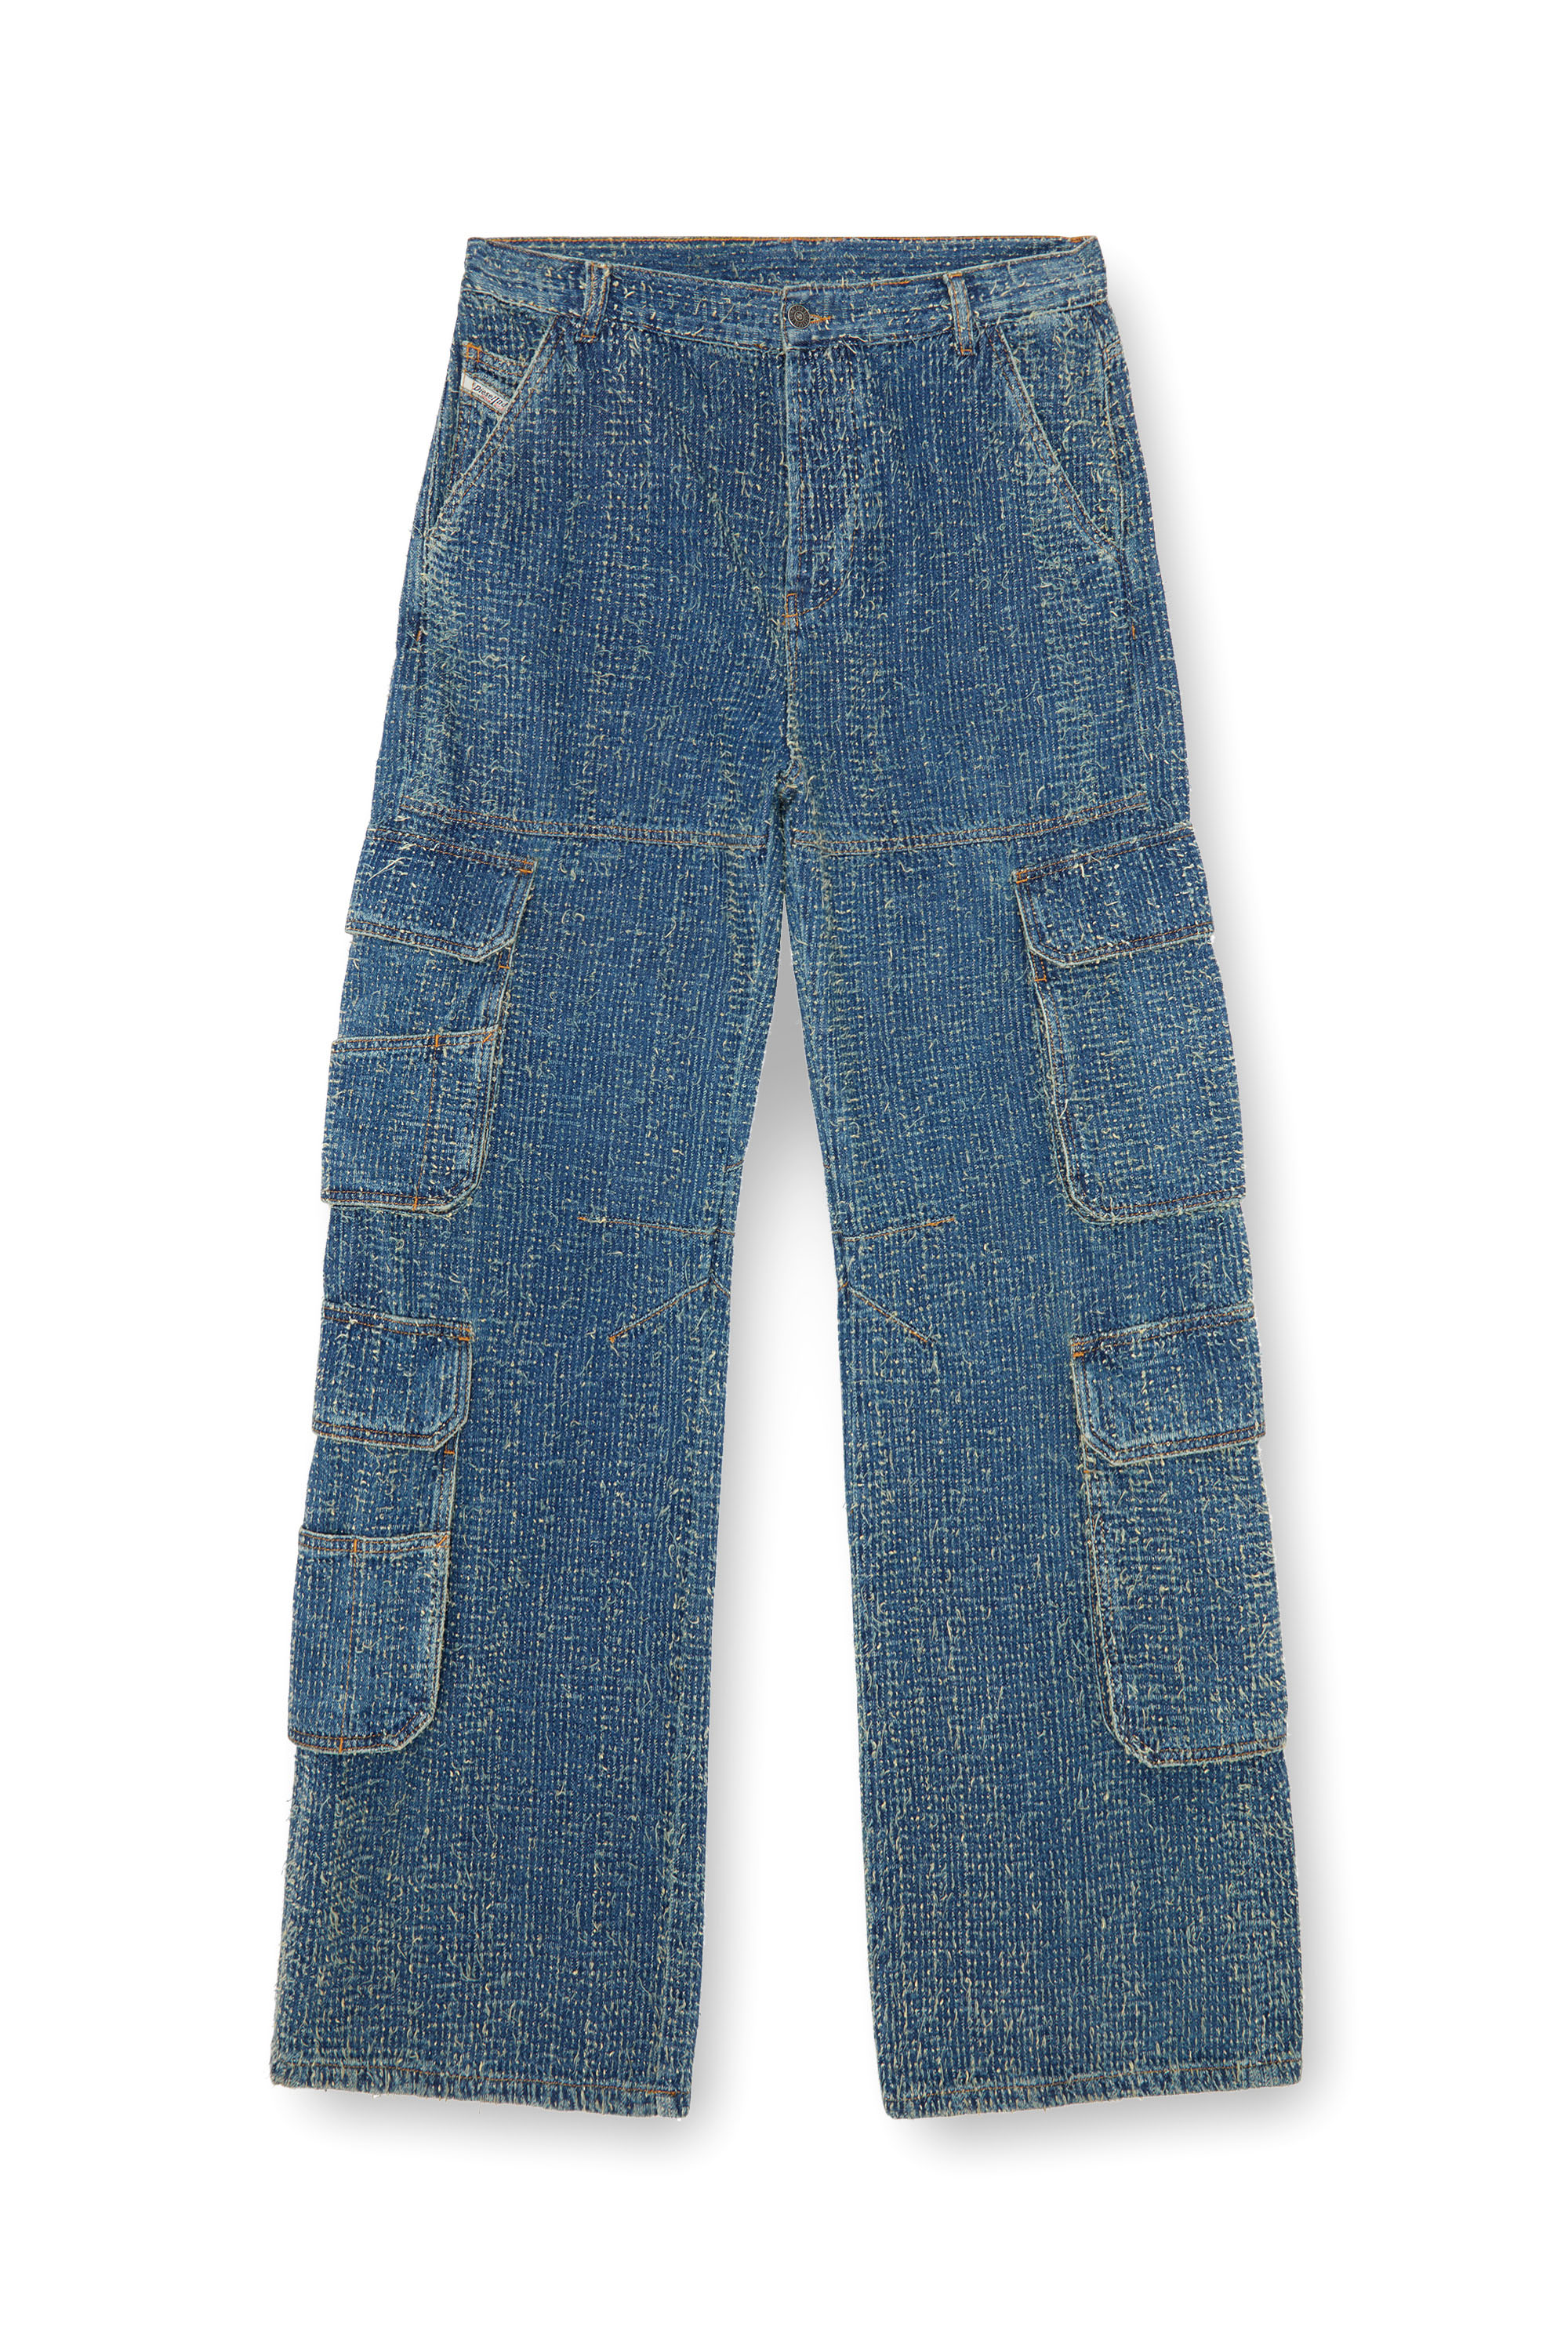 Diesel - Straight Jeans 1996 D-Sire 0PGAH, Mujer Straight Jeans - 1996 D-Sire in Azul marino - Image 7